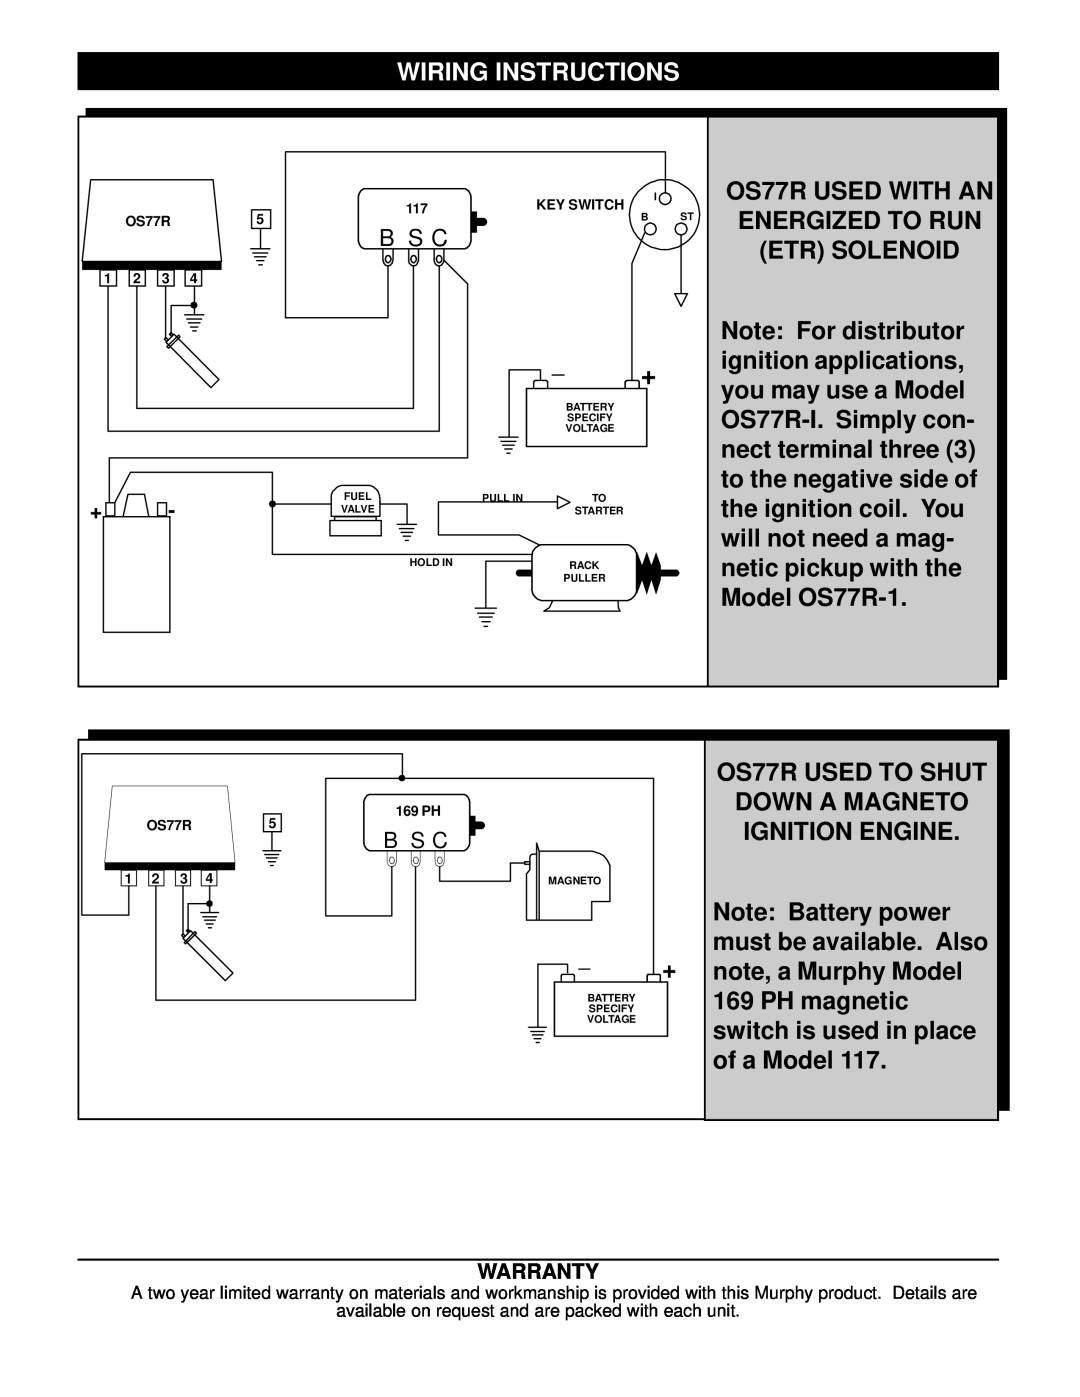 Murphy OS-77R-I Wiring Instructions, OS77R USED WITH AN ENERGIZED TO RUN ETR SOLENOID, OS77R USED TO SHUT 